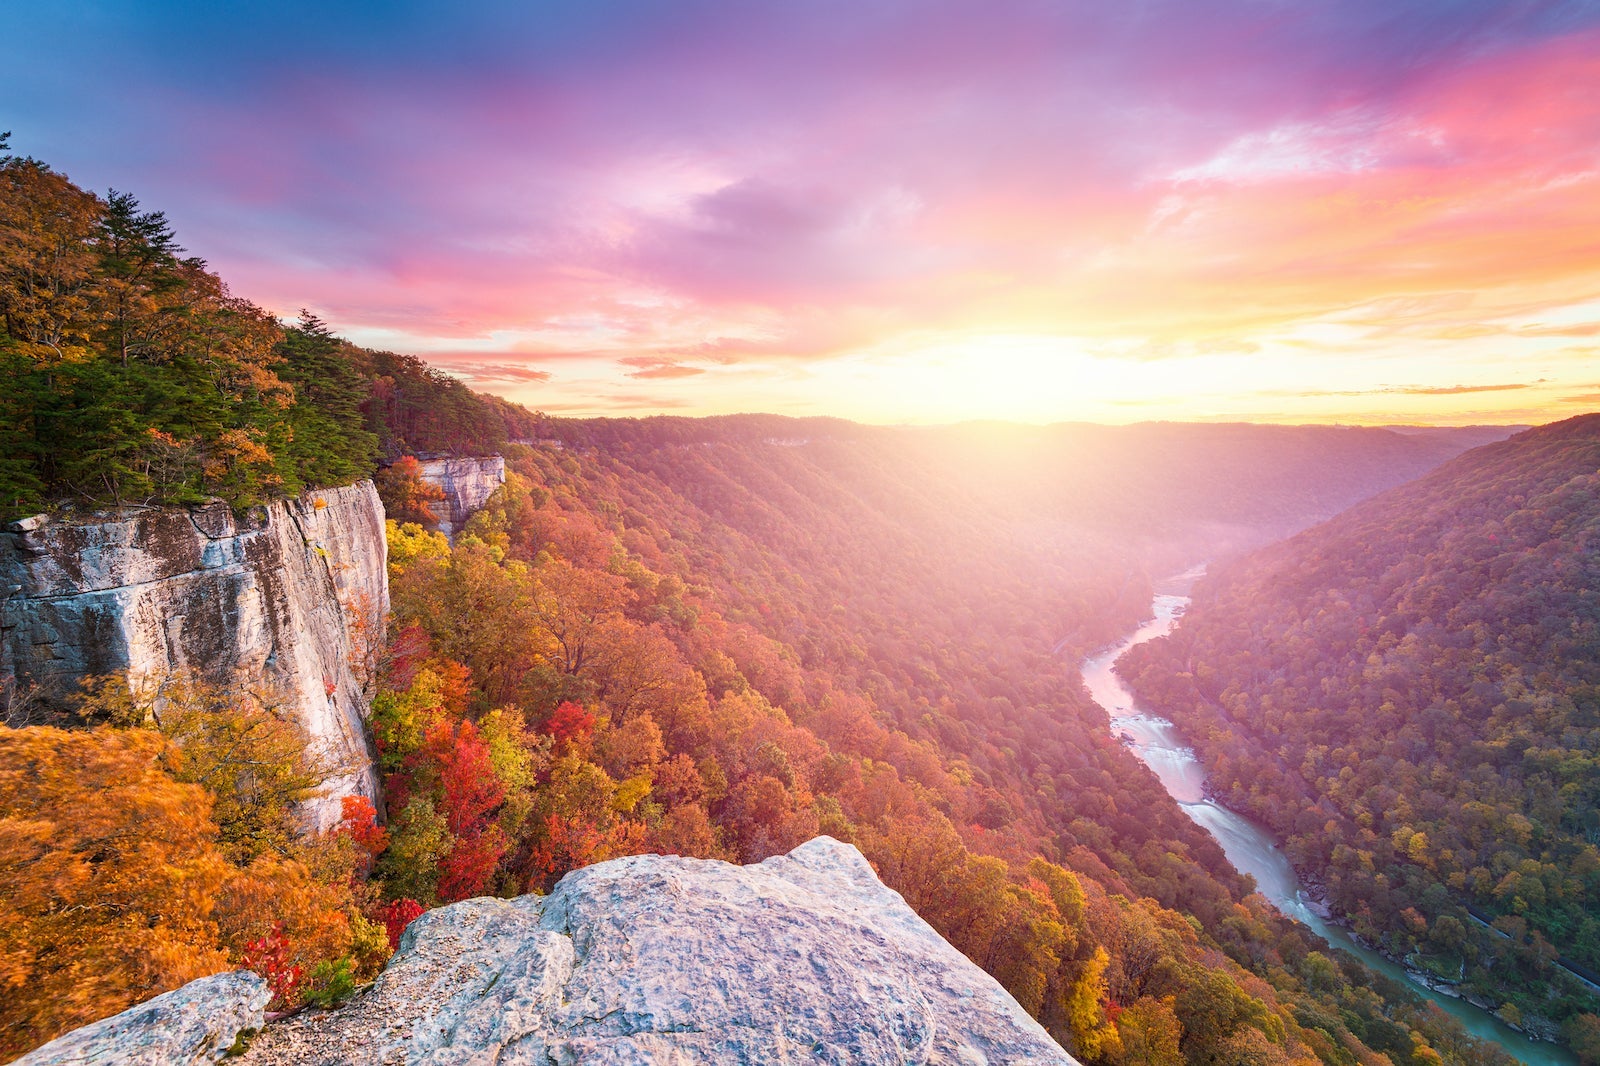 Looking for a change in scenery? West Virginia will pay remote workers